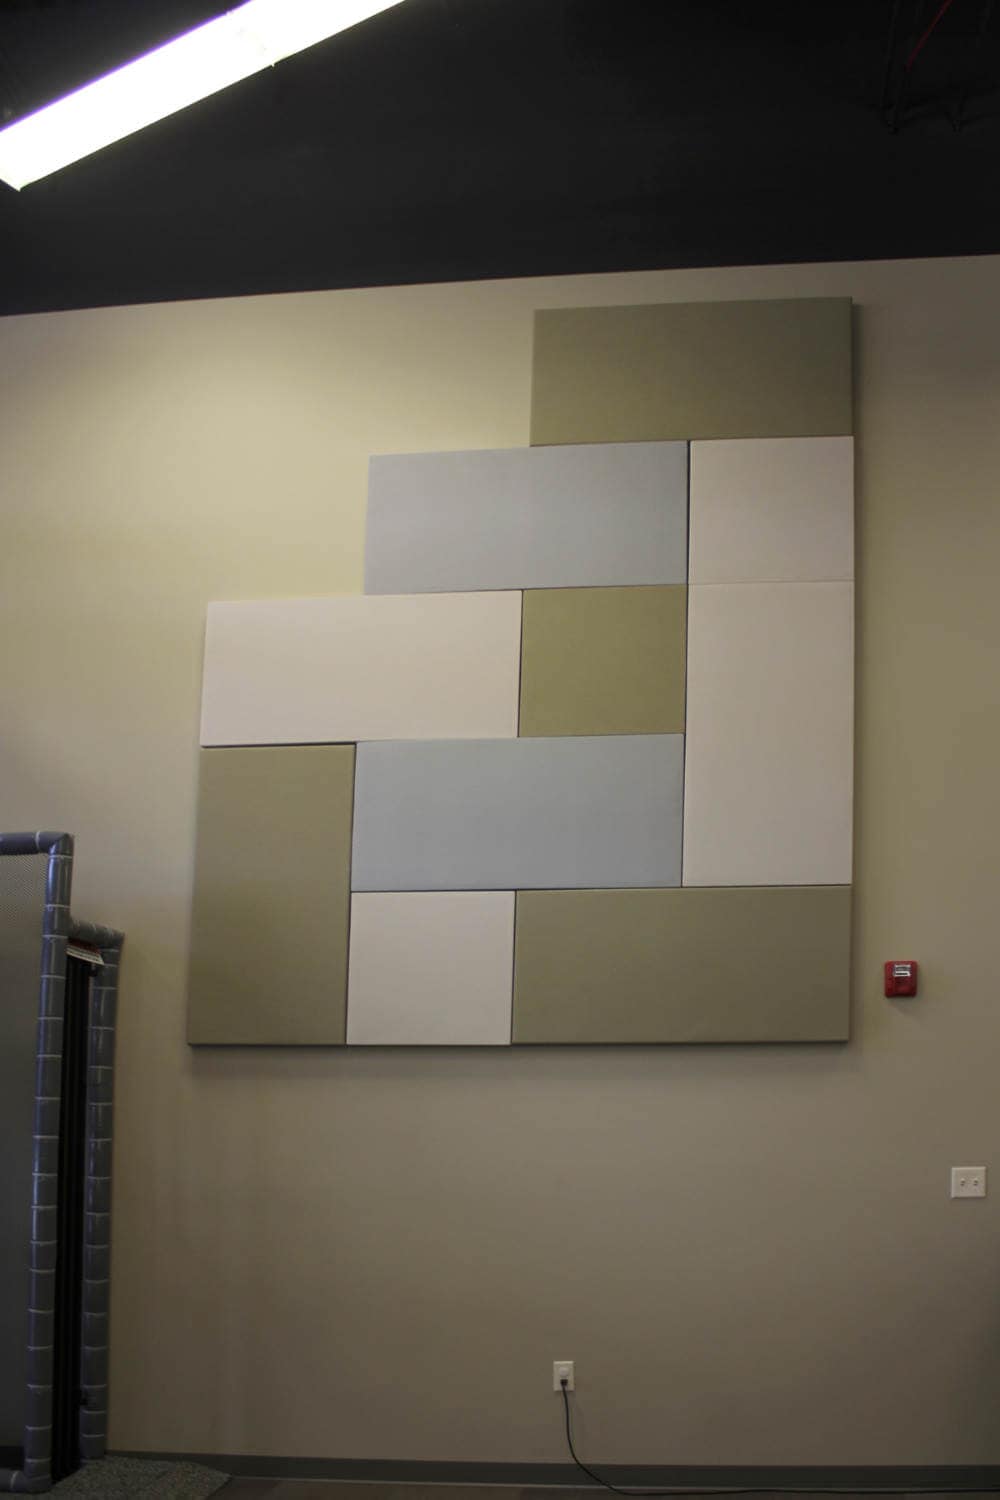 Children's Center with Standard Series acoustic panels